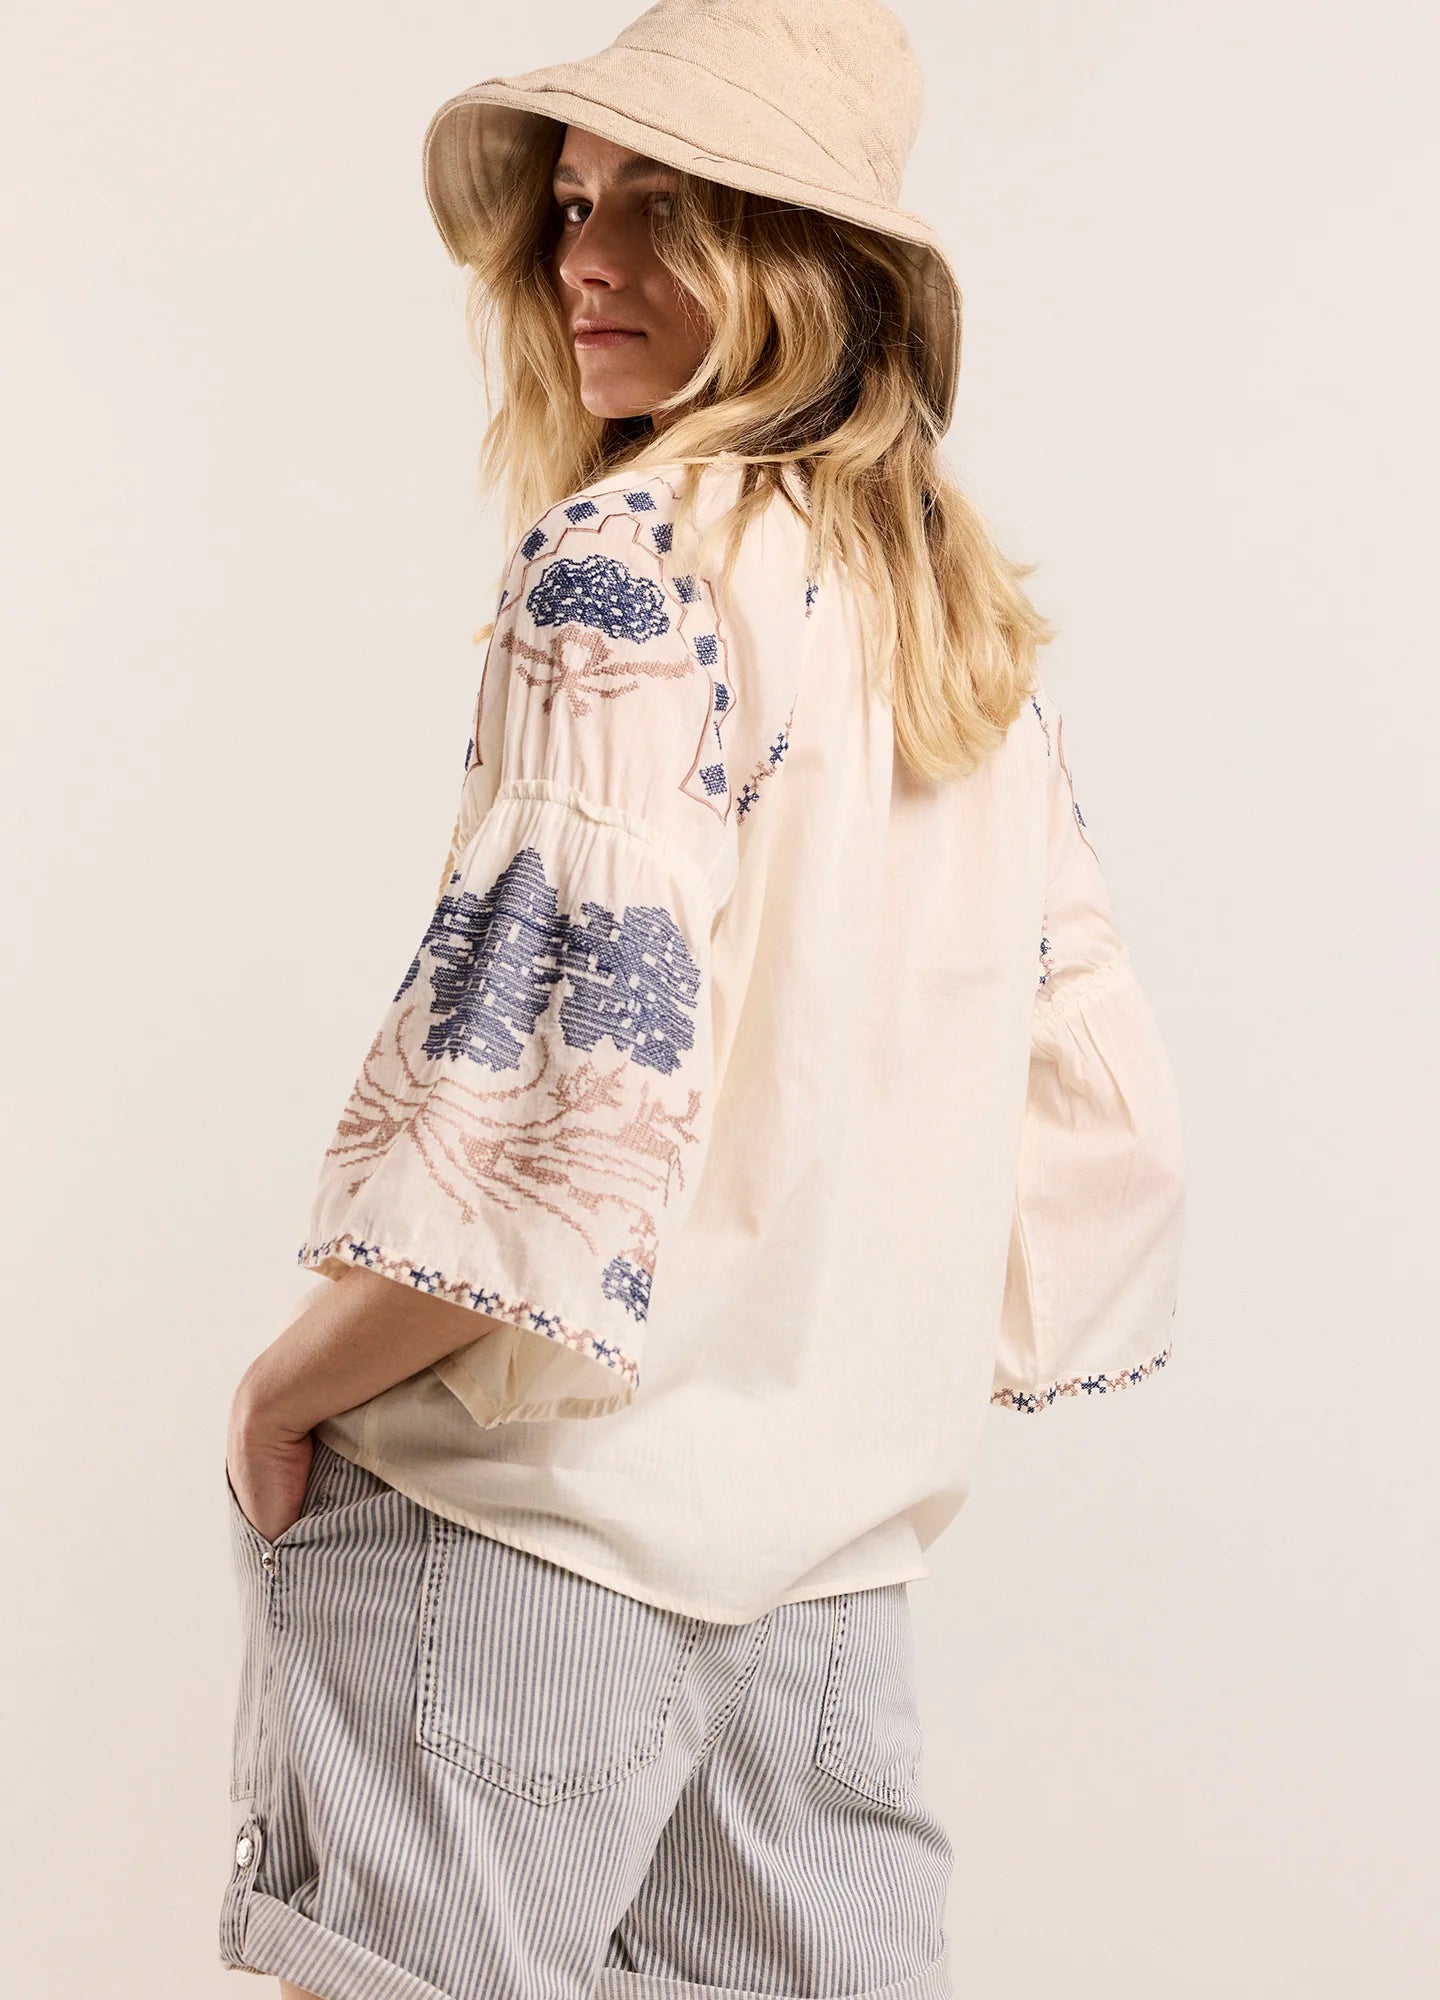 Bohemian Blouse in Off White